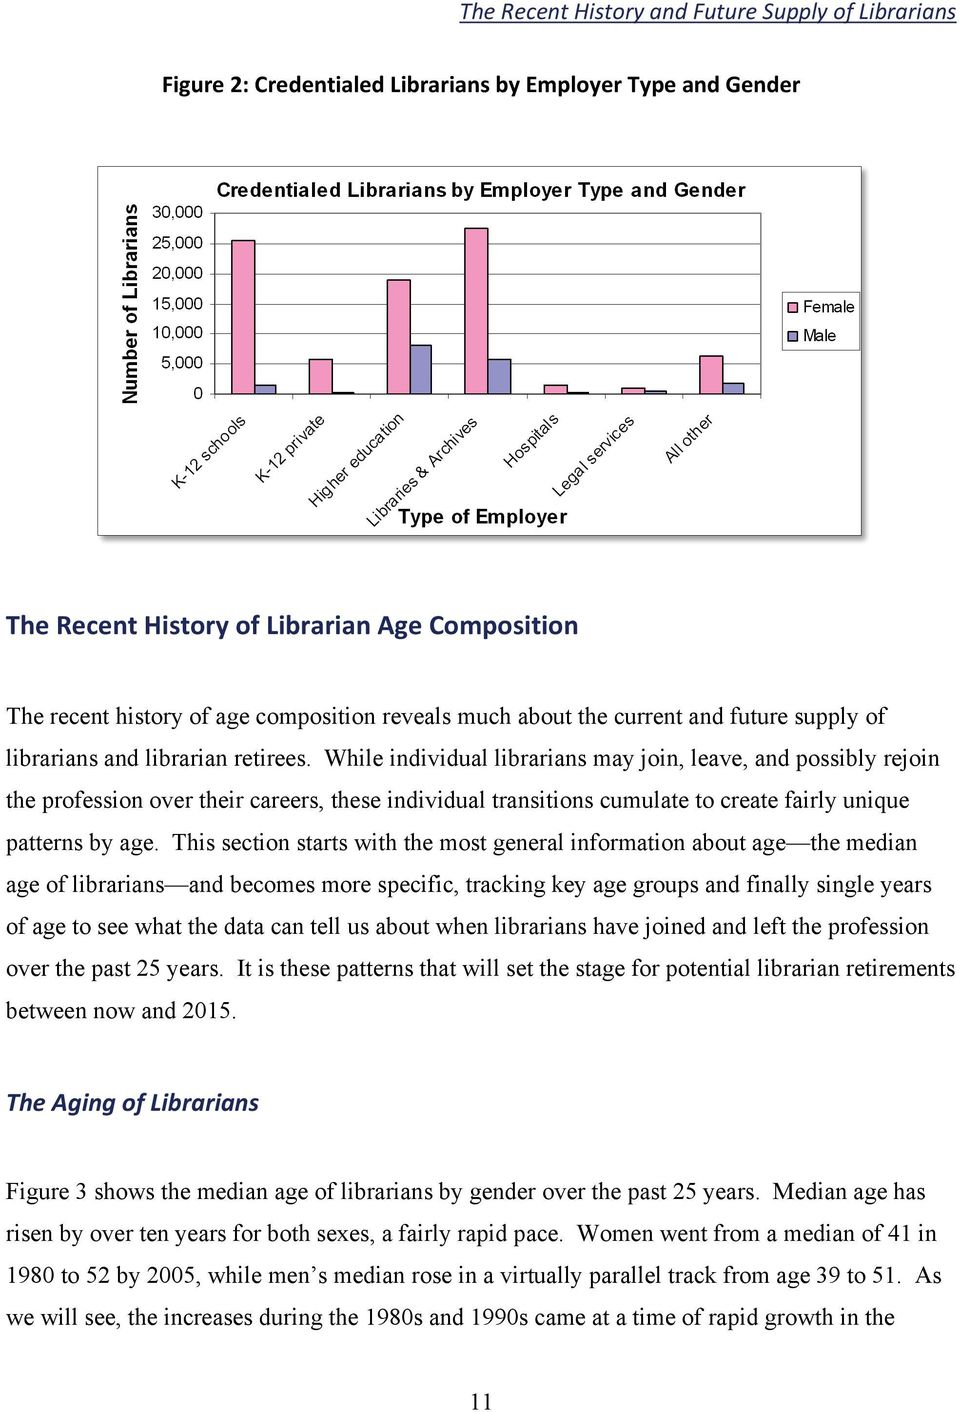 While individual librarians may join, leave, and possibly rejoin the profession over their careers, these individual transitions cumulate to create fairly unique patterns by age.